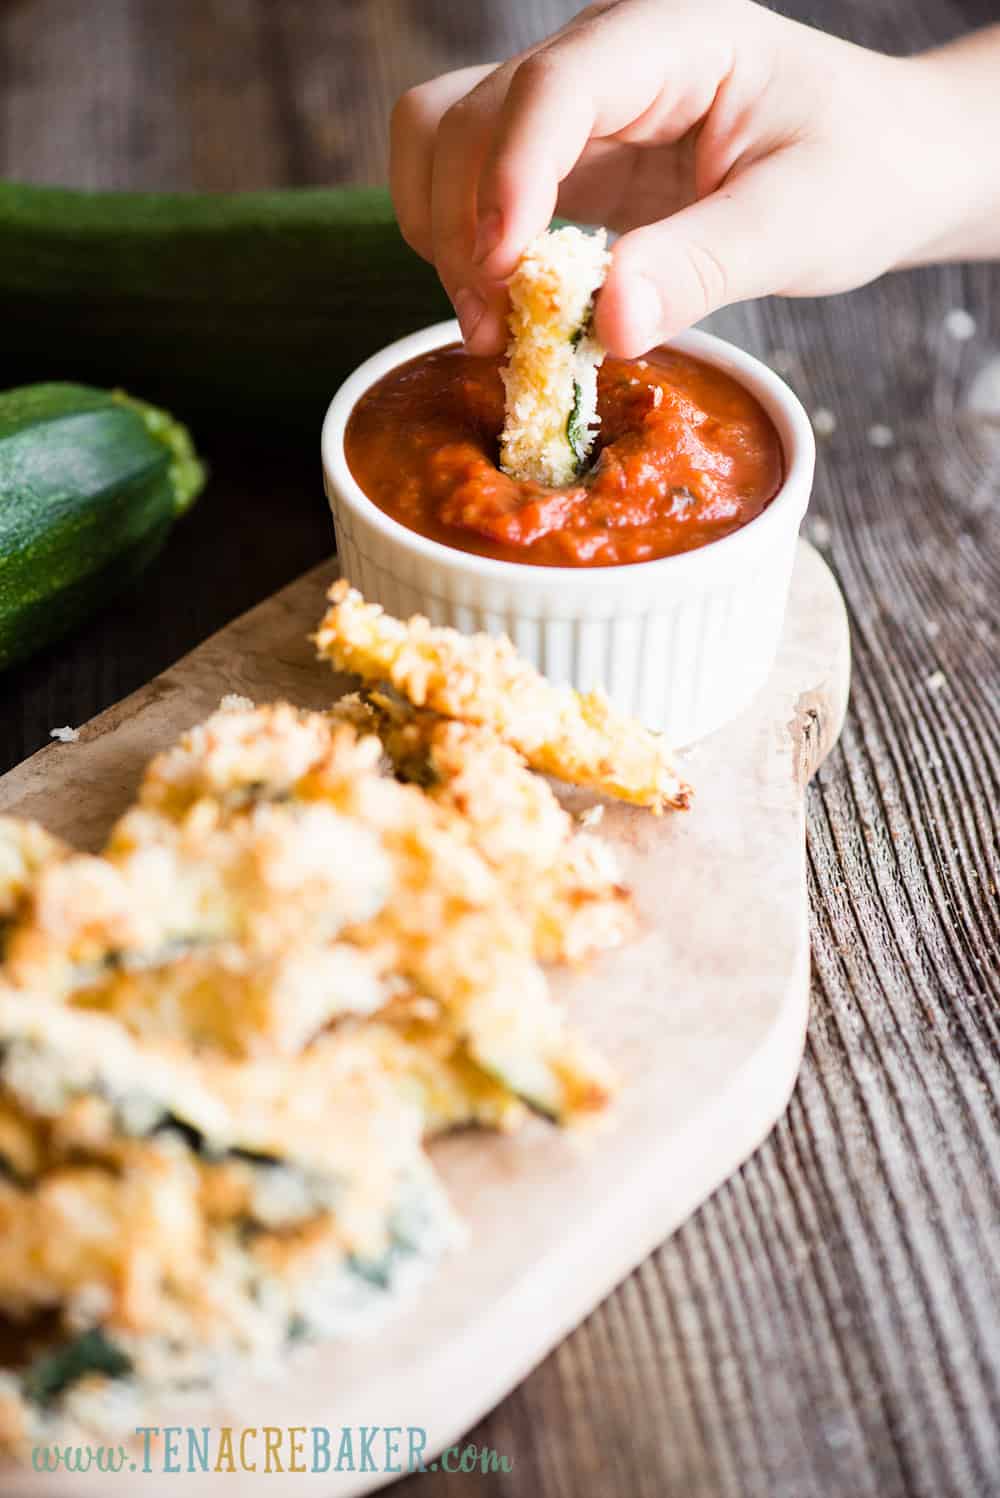 Dipping zucchini fry in sauce